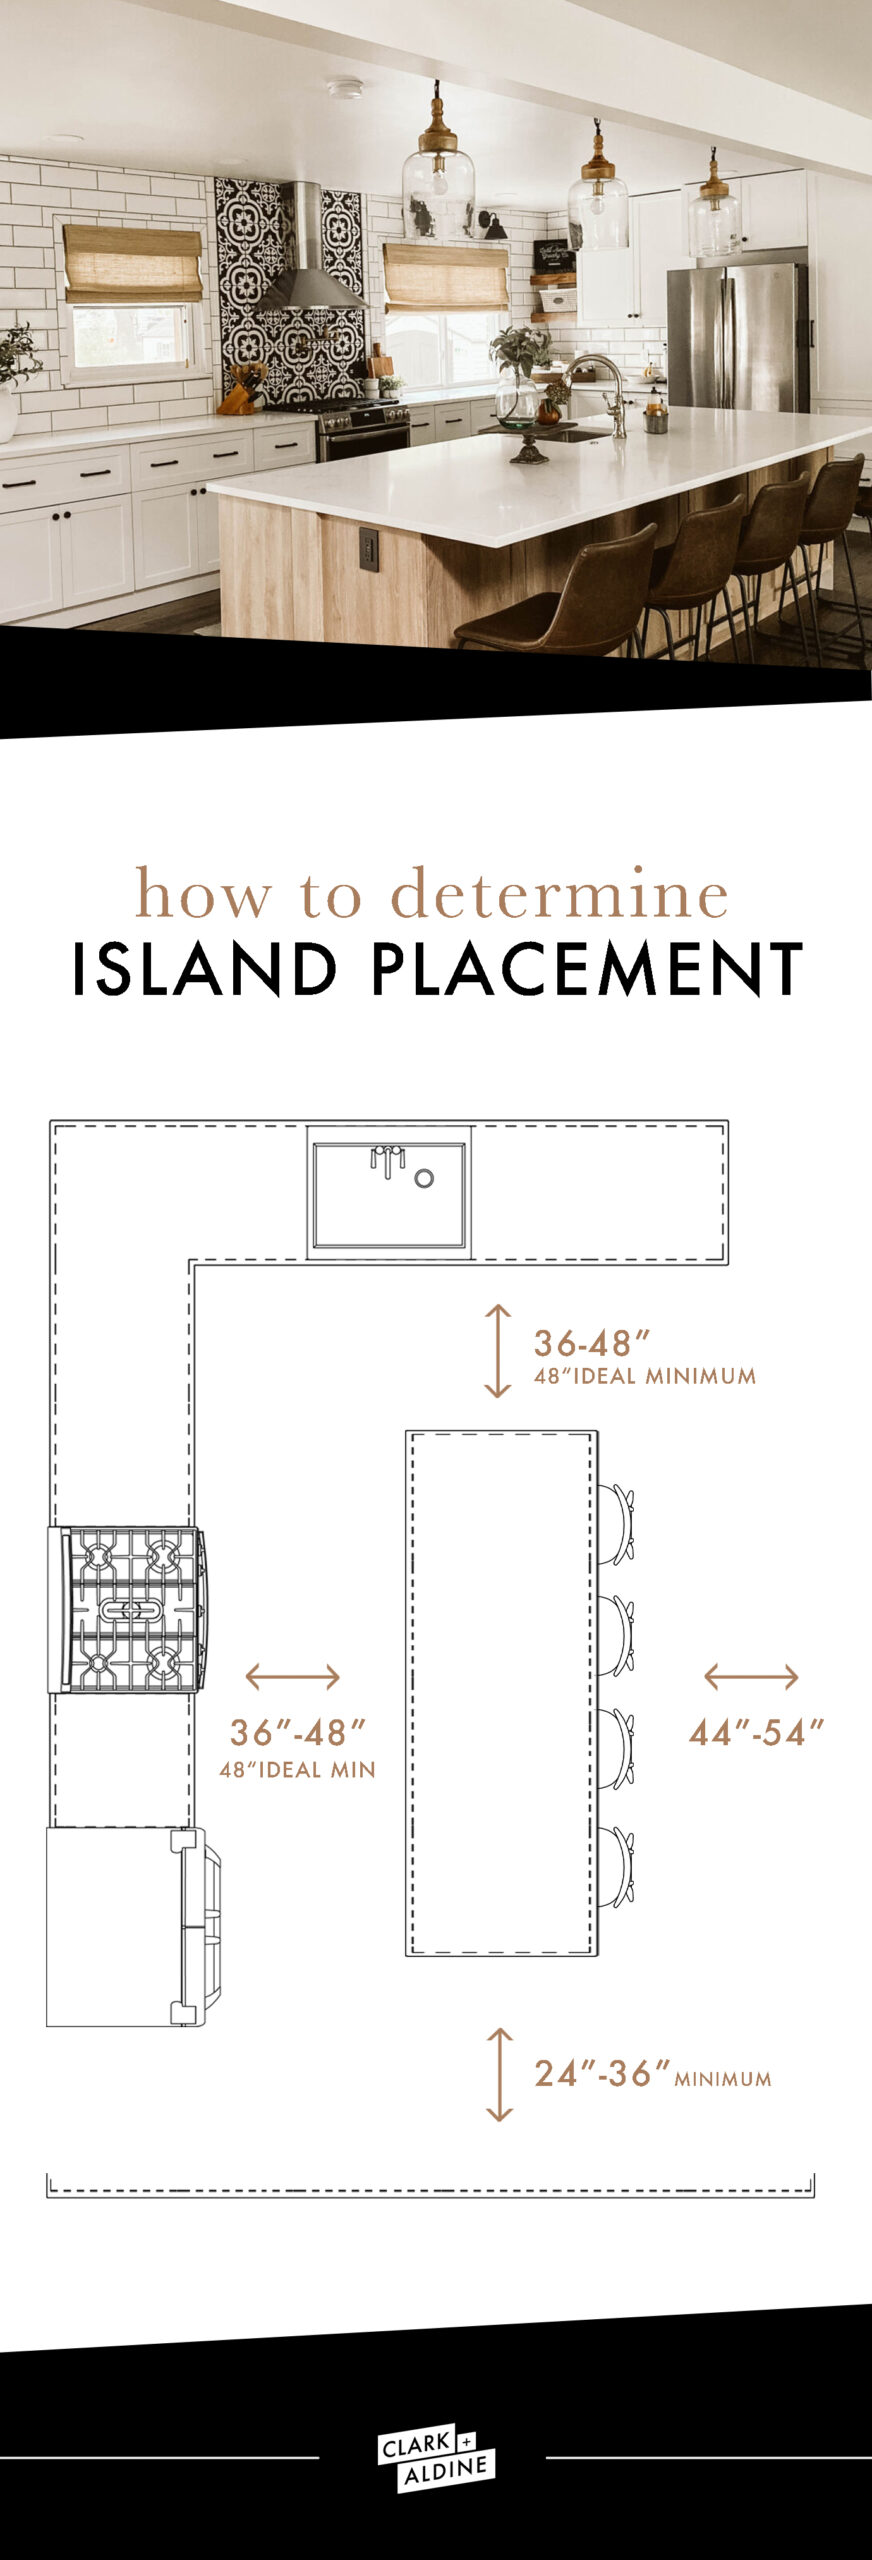 HOW TO DETERMINE KITCHEN ISLAND PLACEMENT image 4